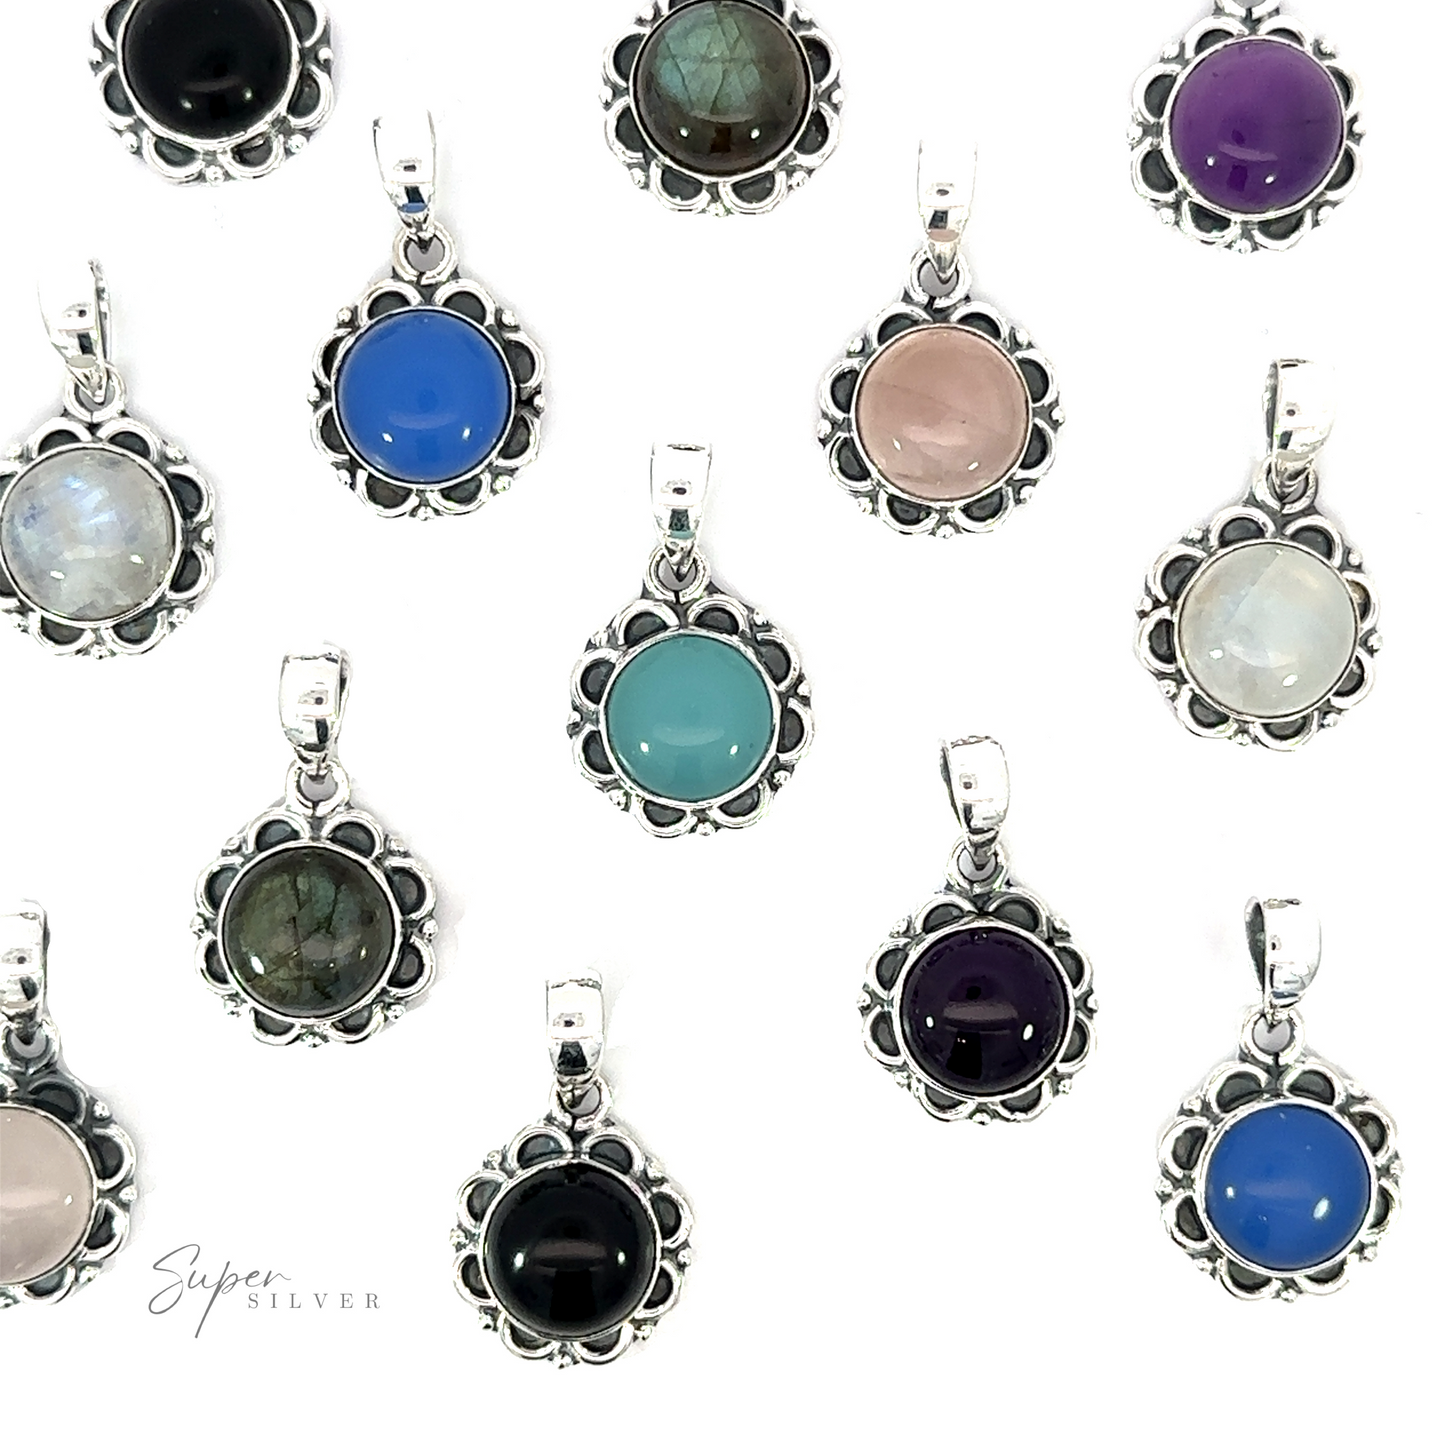 A collection of nature's charm showcased through Round Gemstone Pendants with Flower Border, featuring an everyday style on a white background.